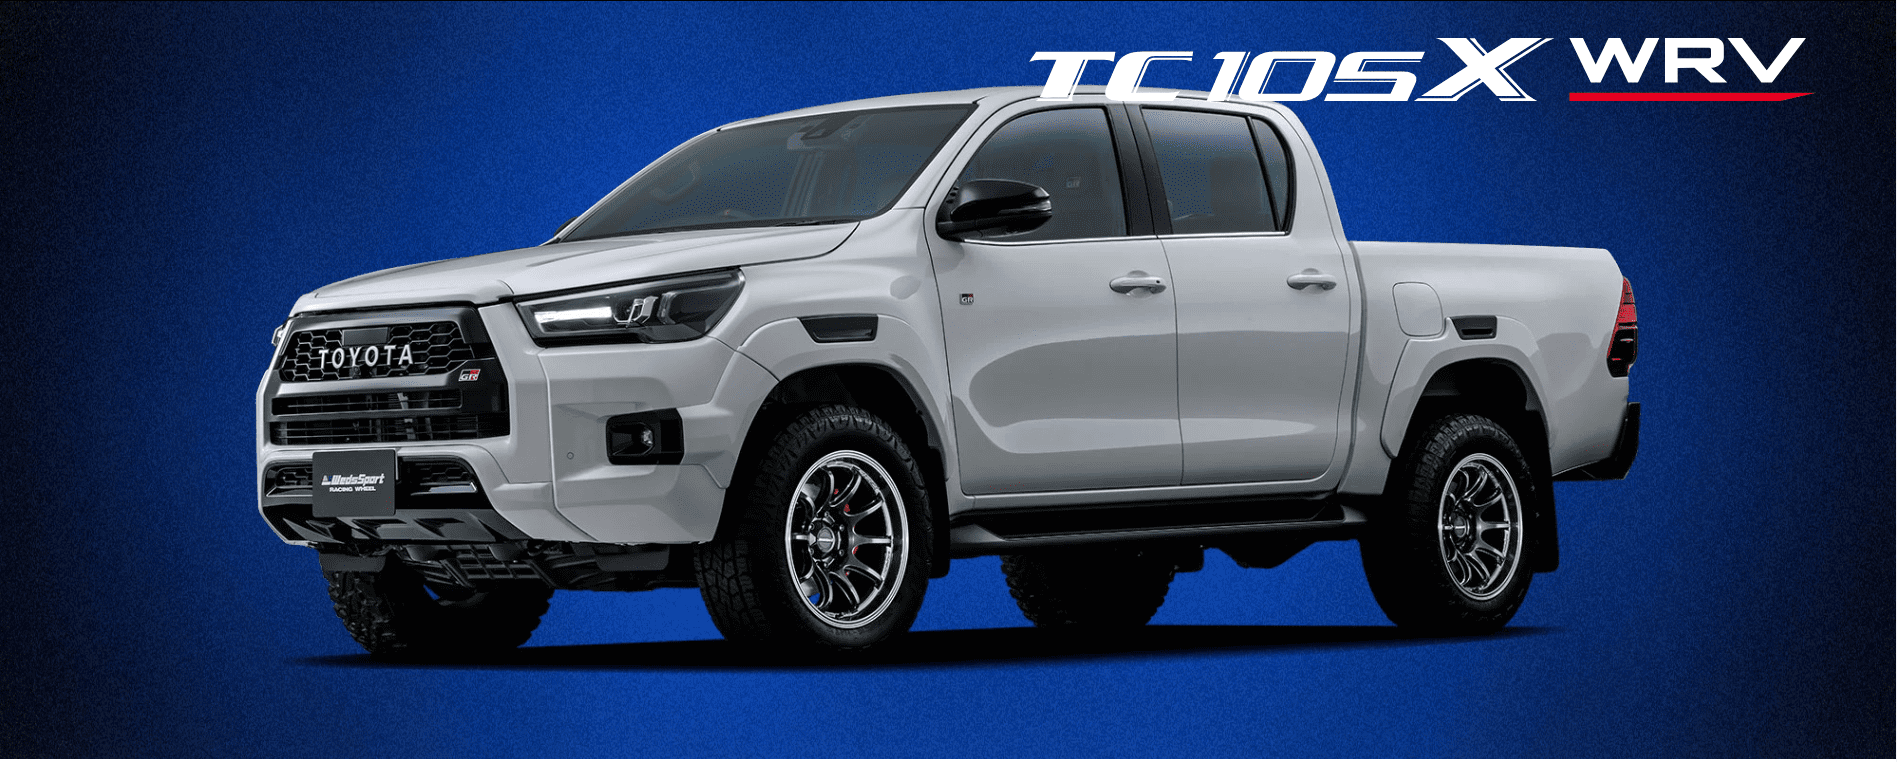 The 2019 toyota hilux is shown on a blue background.